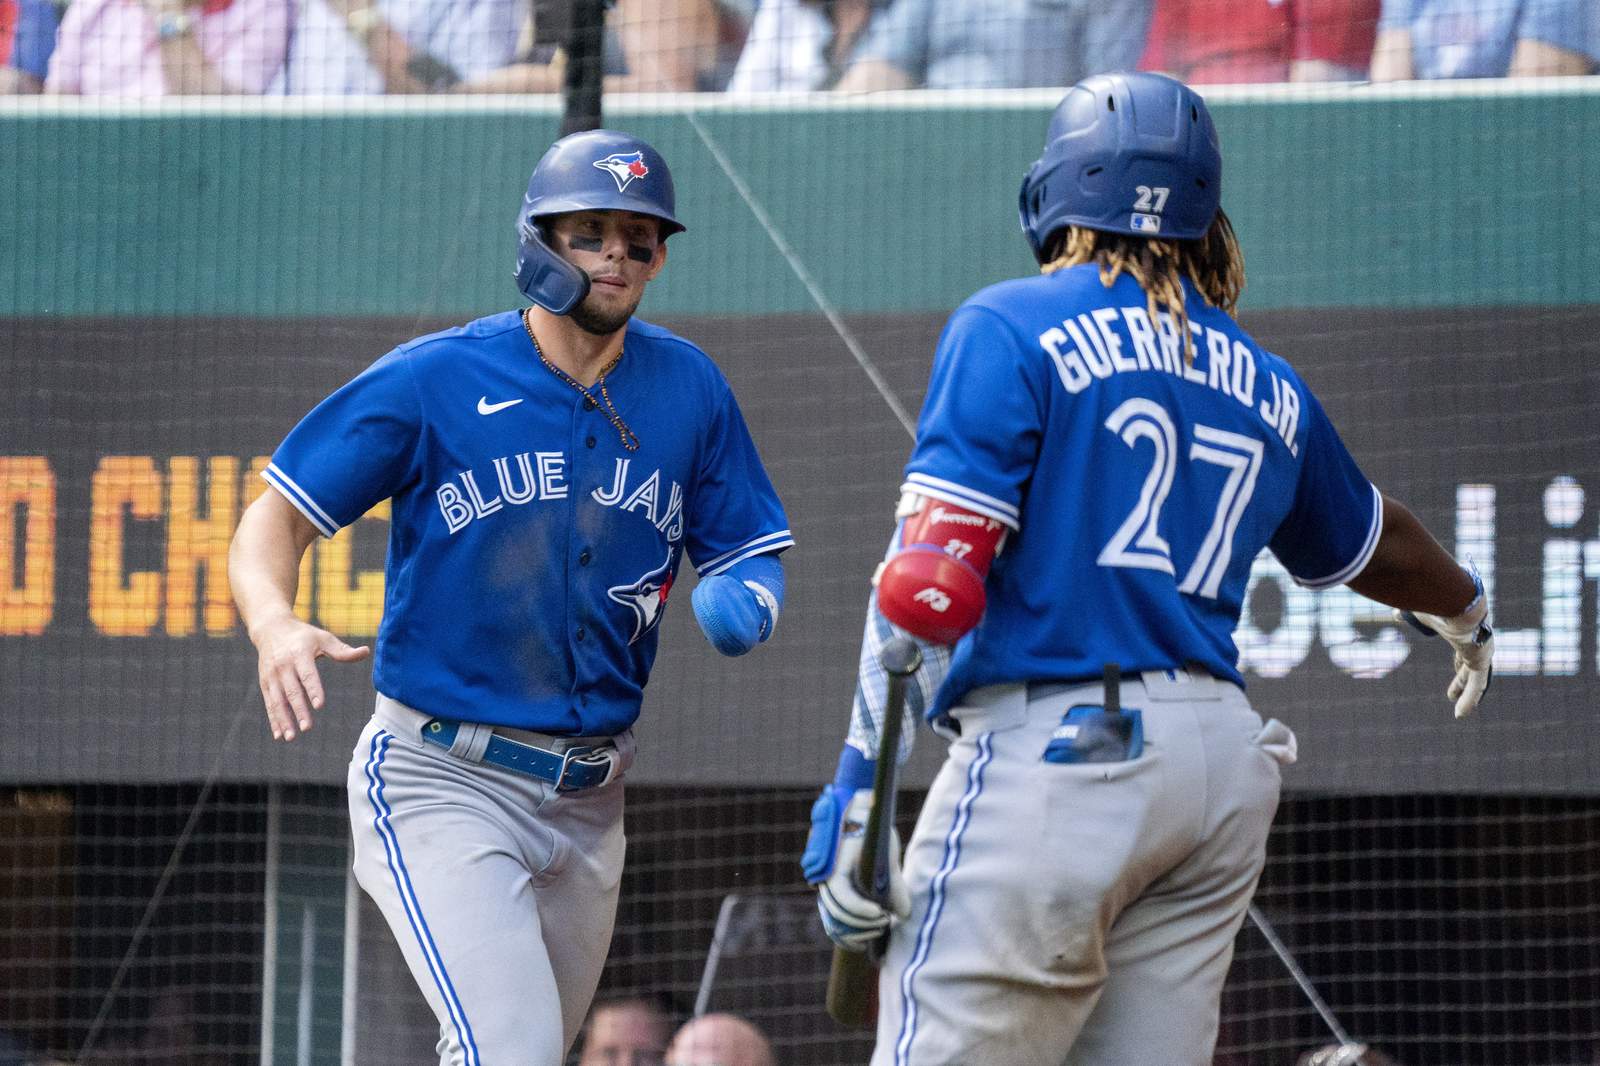 LEADING OFF: Blue Jays play home opener in new Florida nest